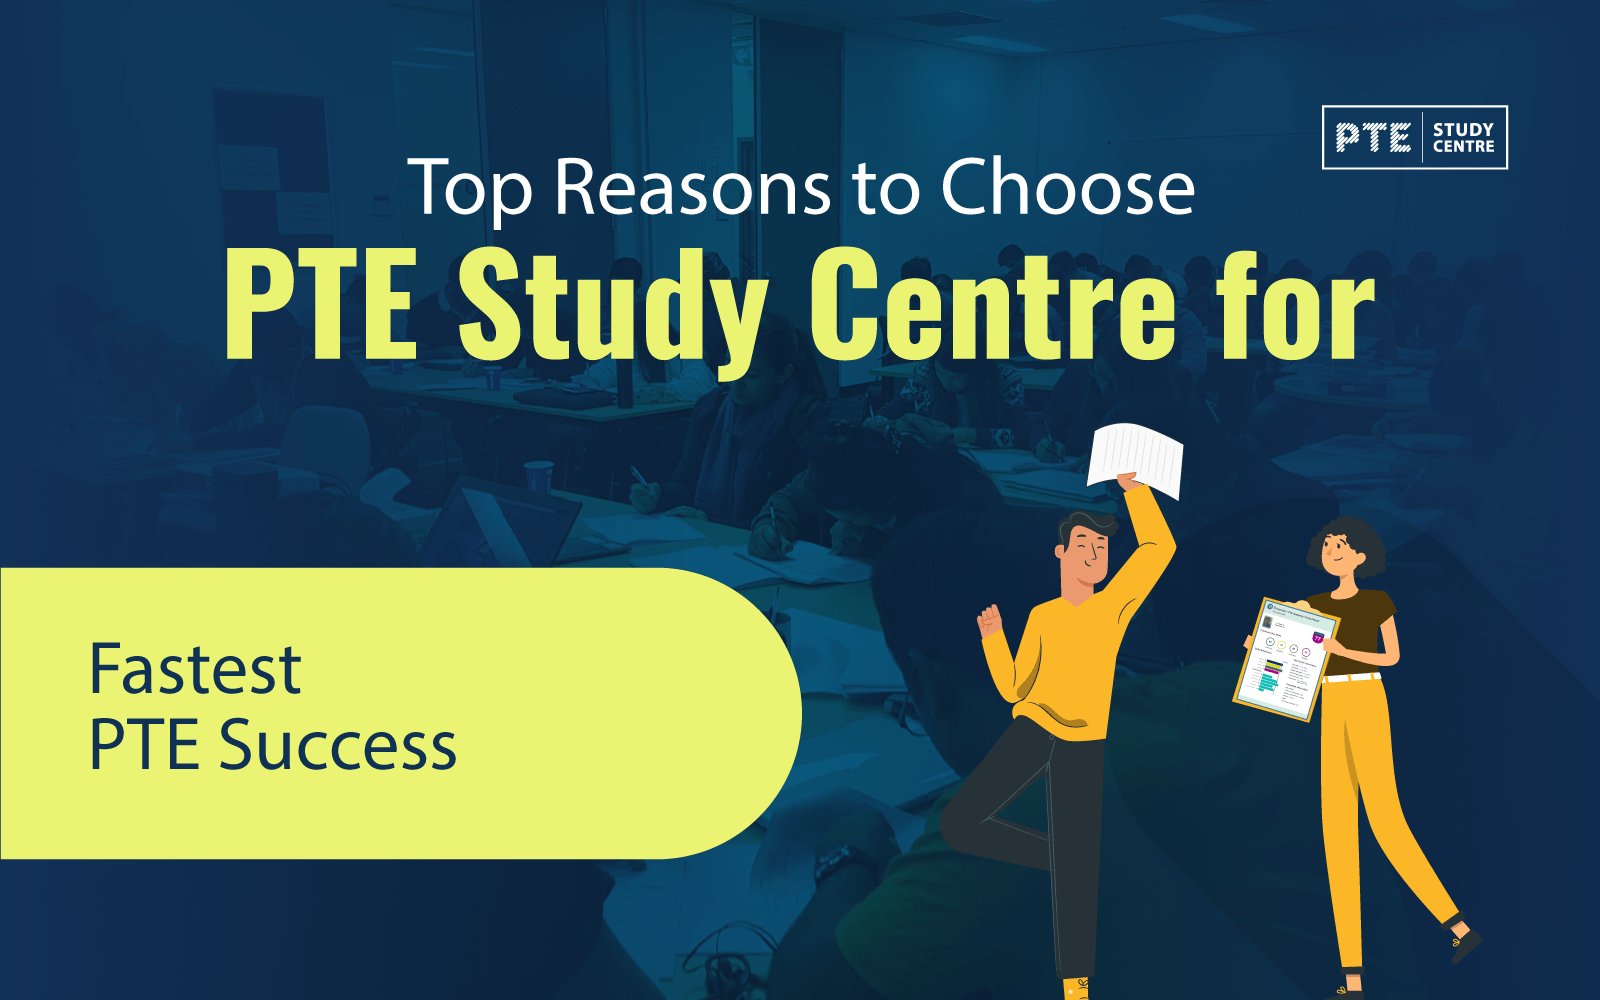 Top Reasons to Choose PTE Study Centre for Fastest PTE Success image